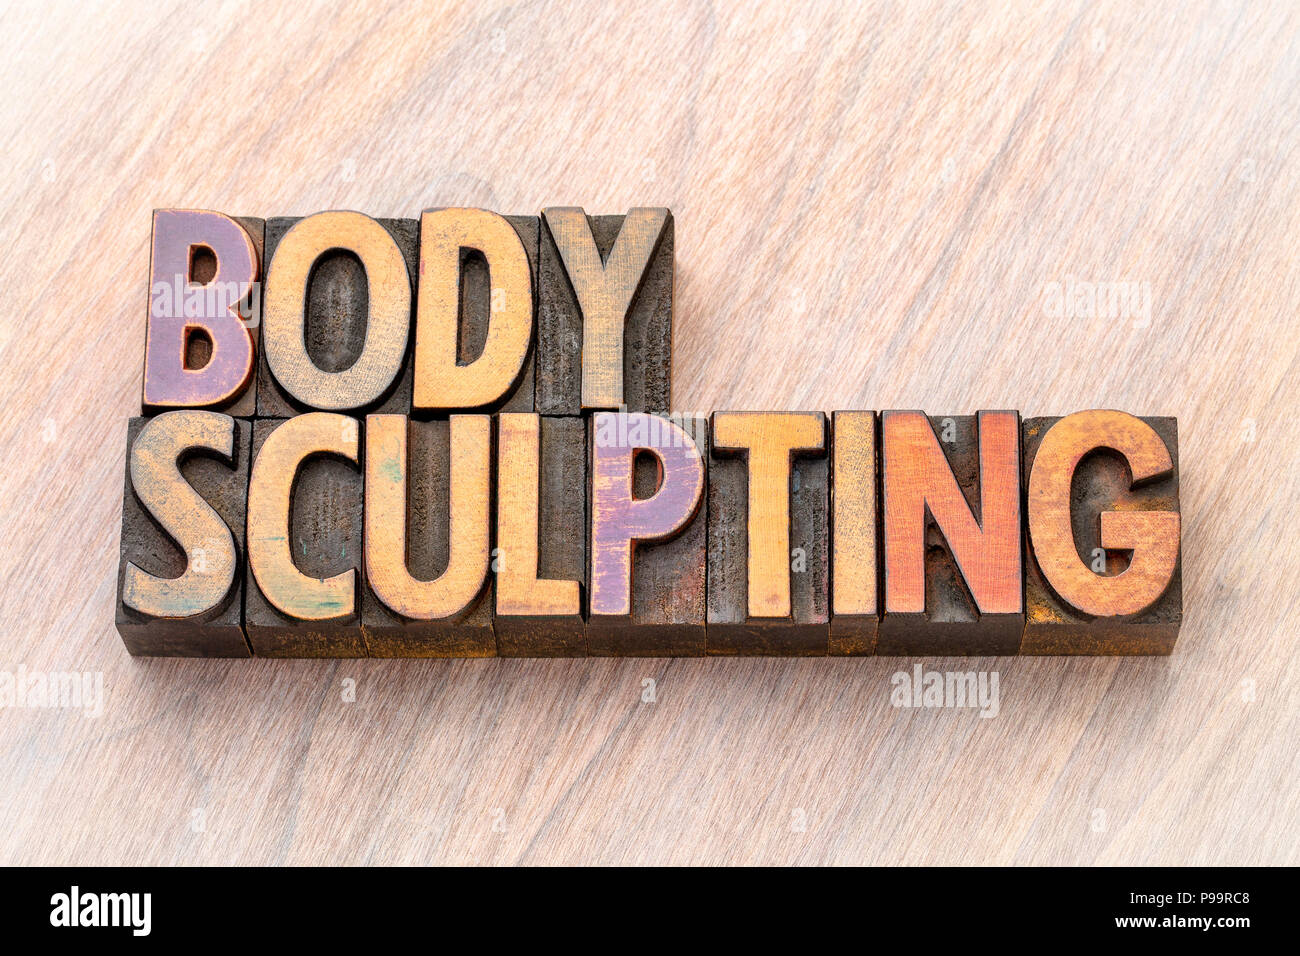 body sculpting - word abstract in vintage letterpress wood type Stock Photo